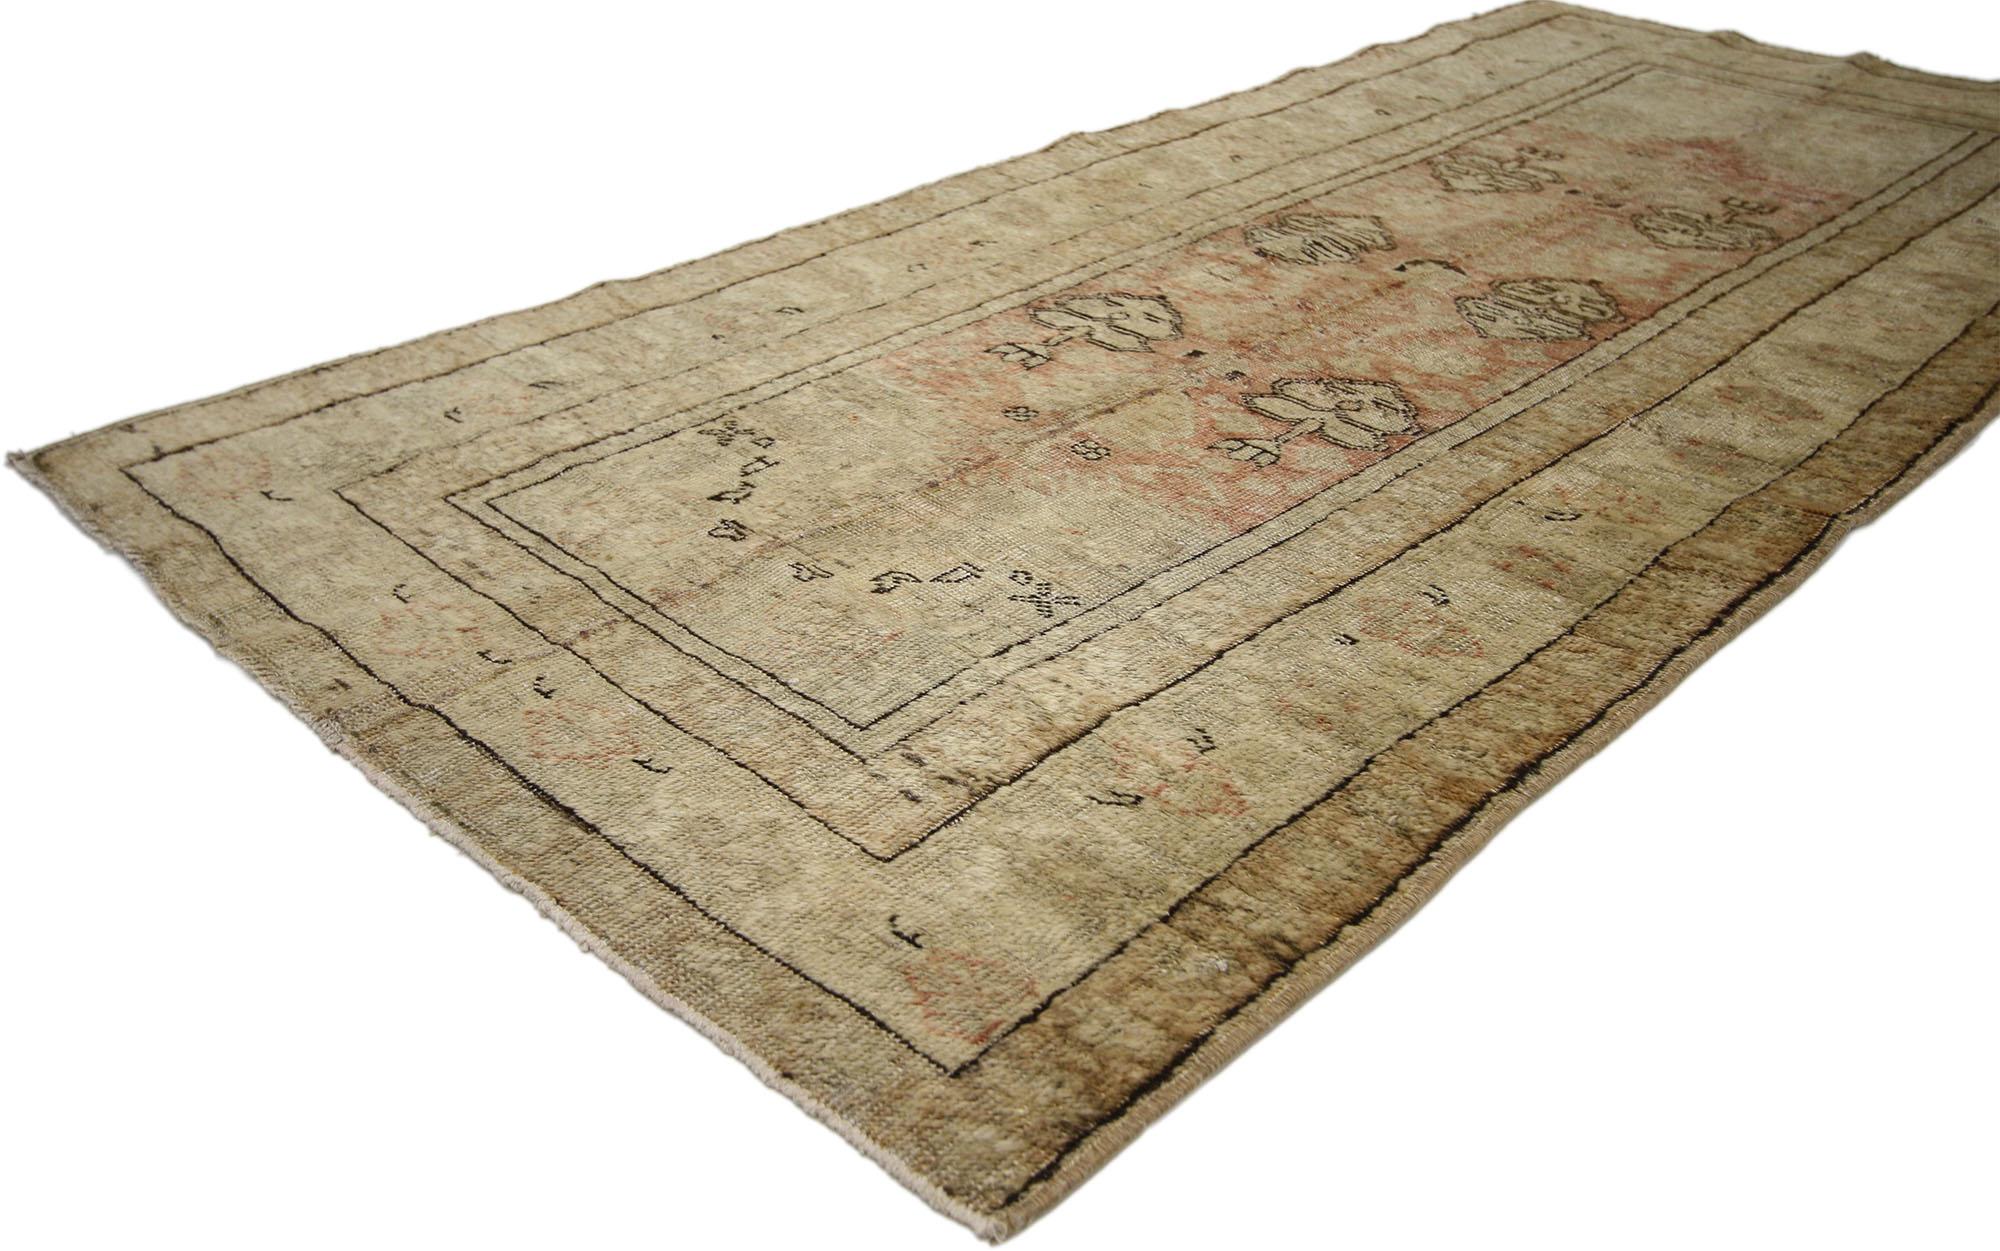 20th Century Vintage Turkish Oushak Rug with Rustic Industrial Style, Short Hallway Runner